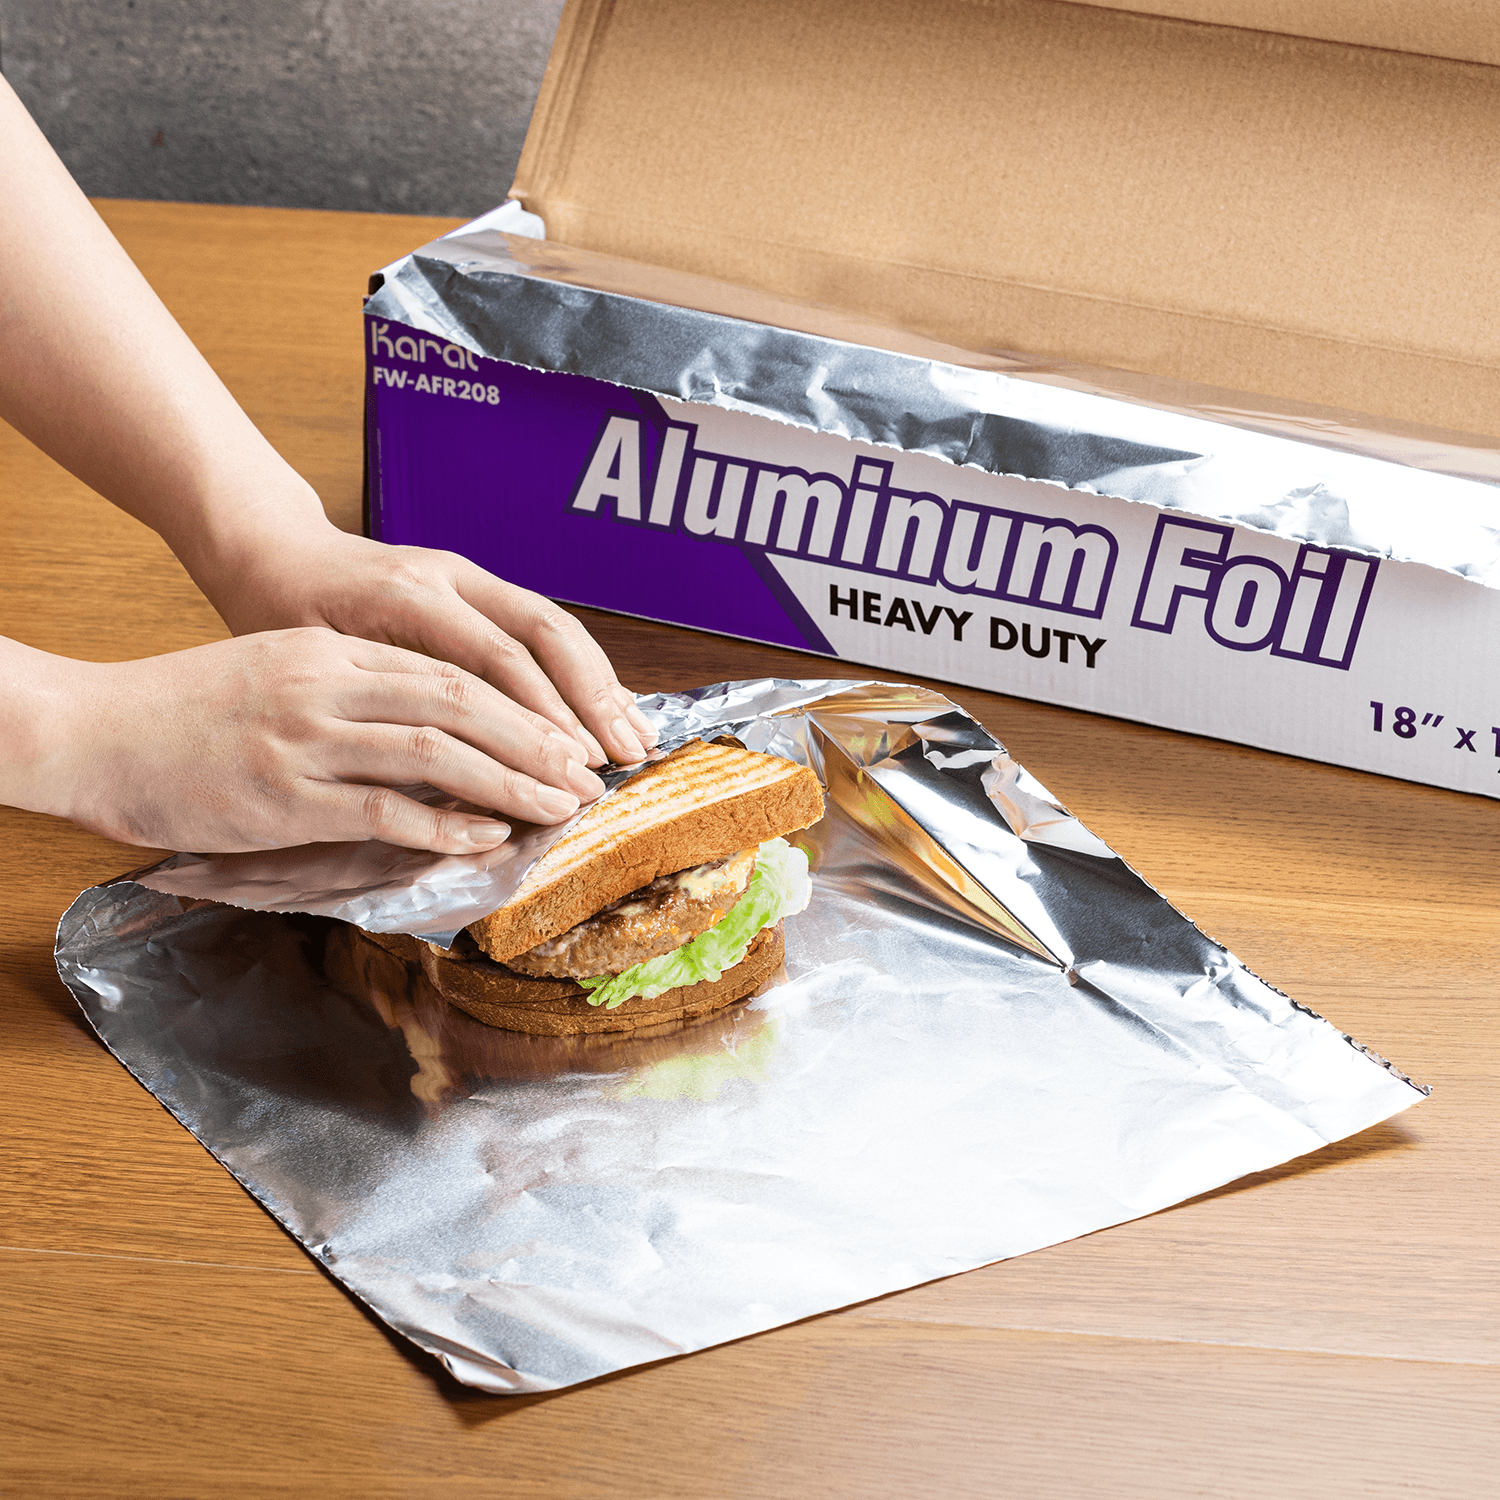 Heavy Duty Food Service Aluminum Foil Roll 18x500' with Cutter